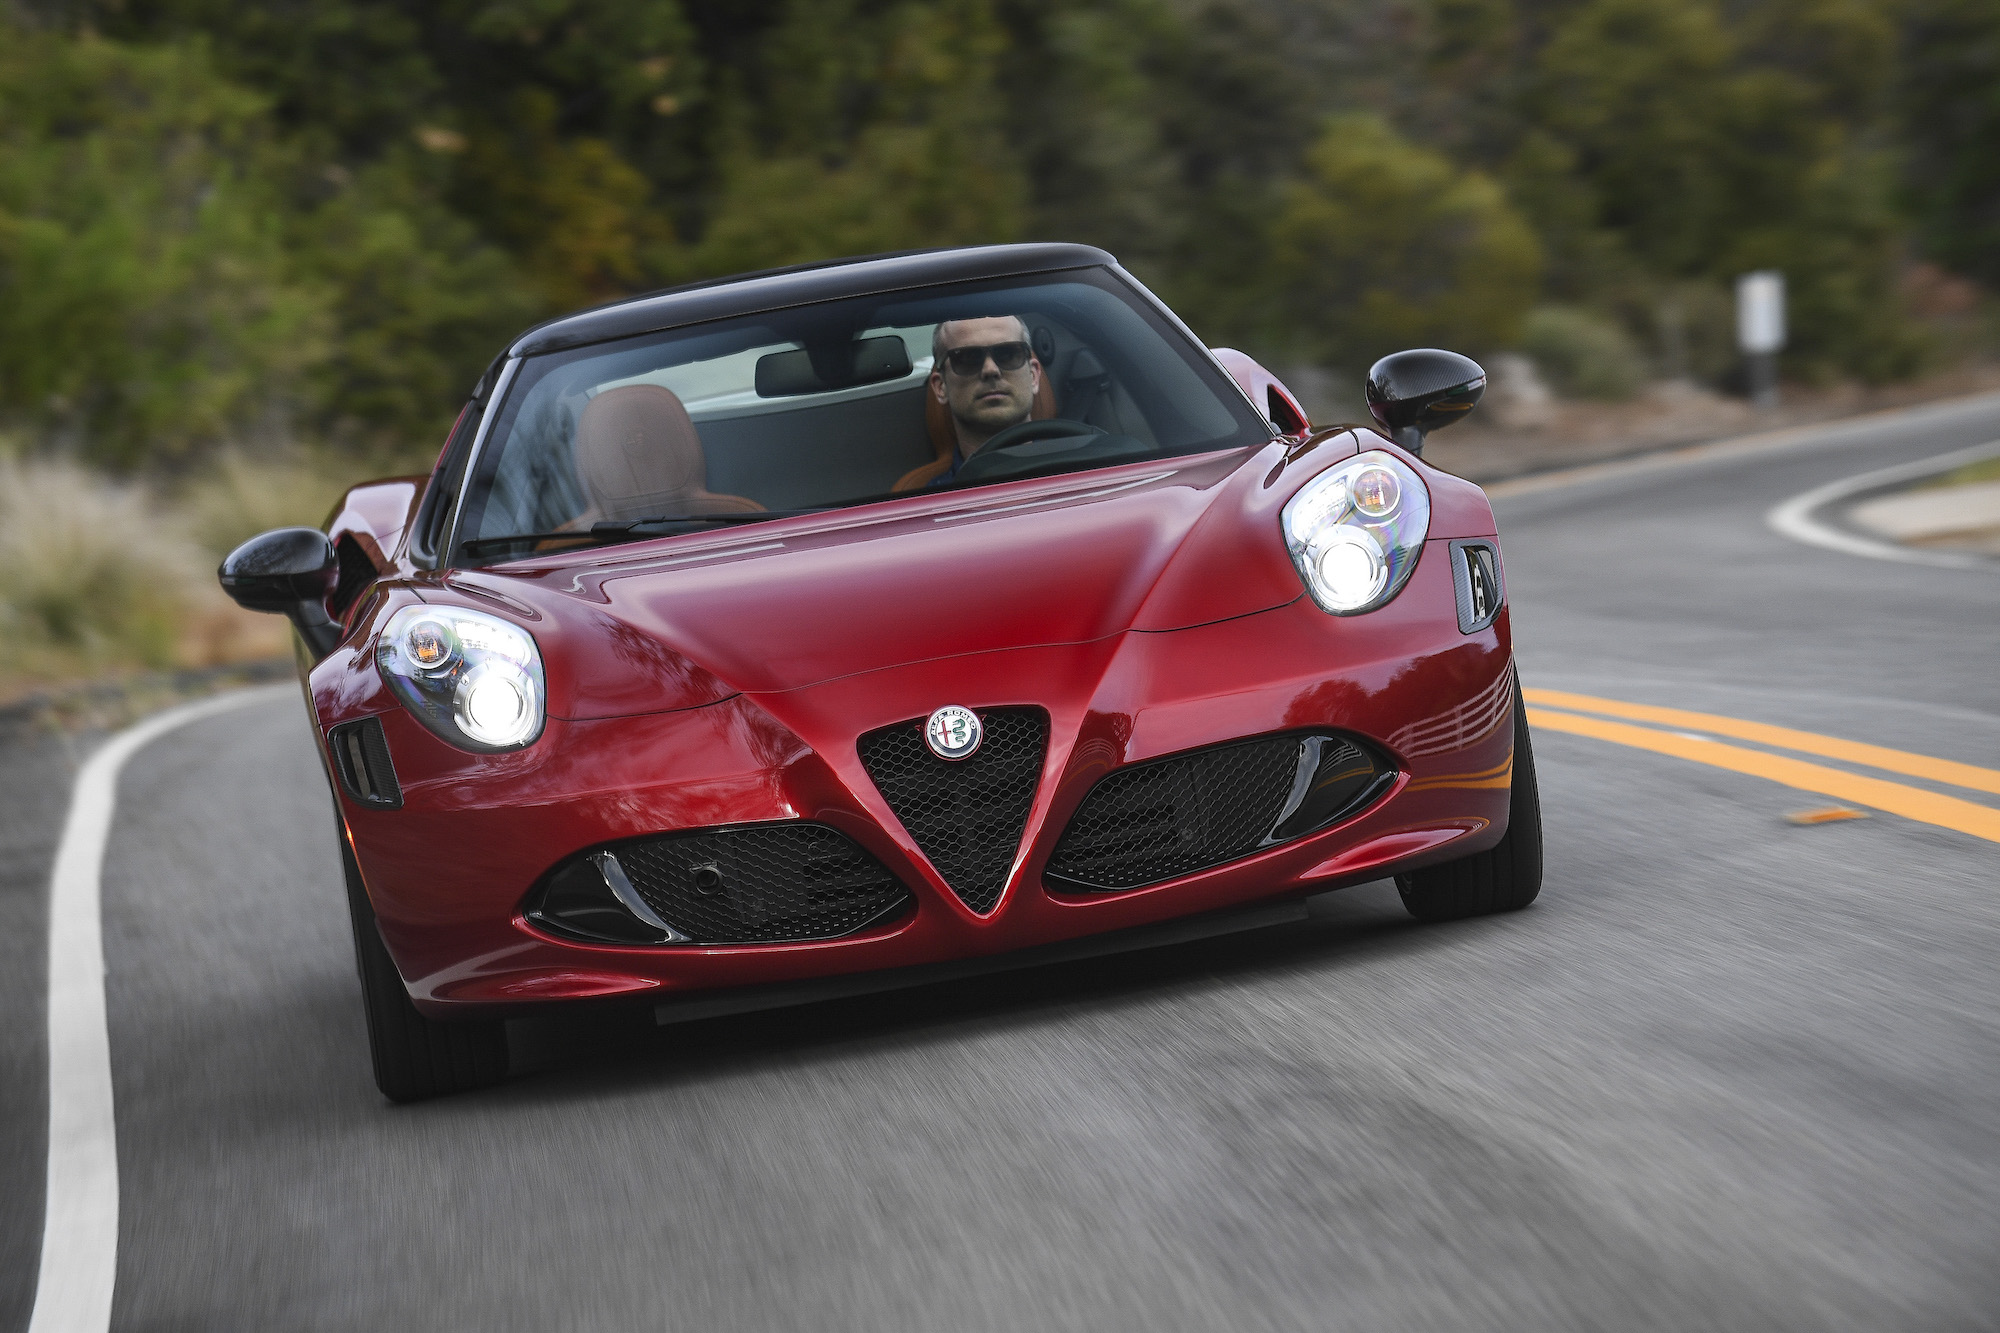 A dark-red 2020 Alfa Romeo 4C Spider 33 Stradale Tributo sports car travels on a winding highway